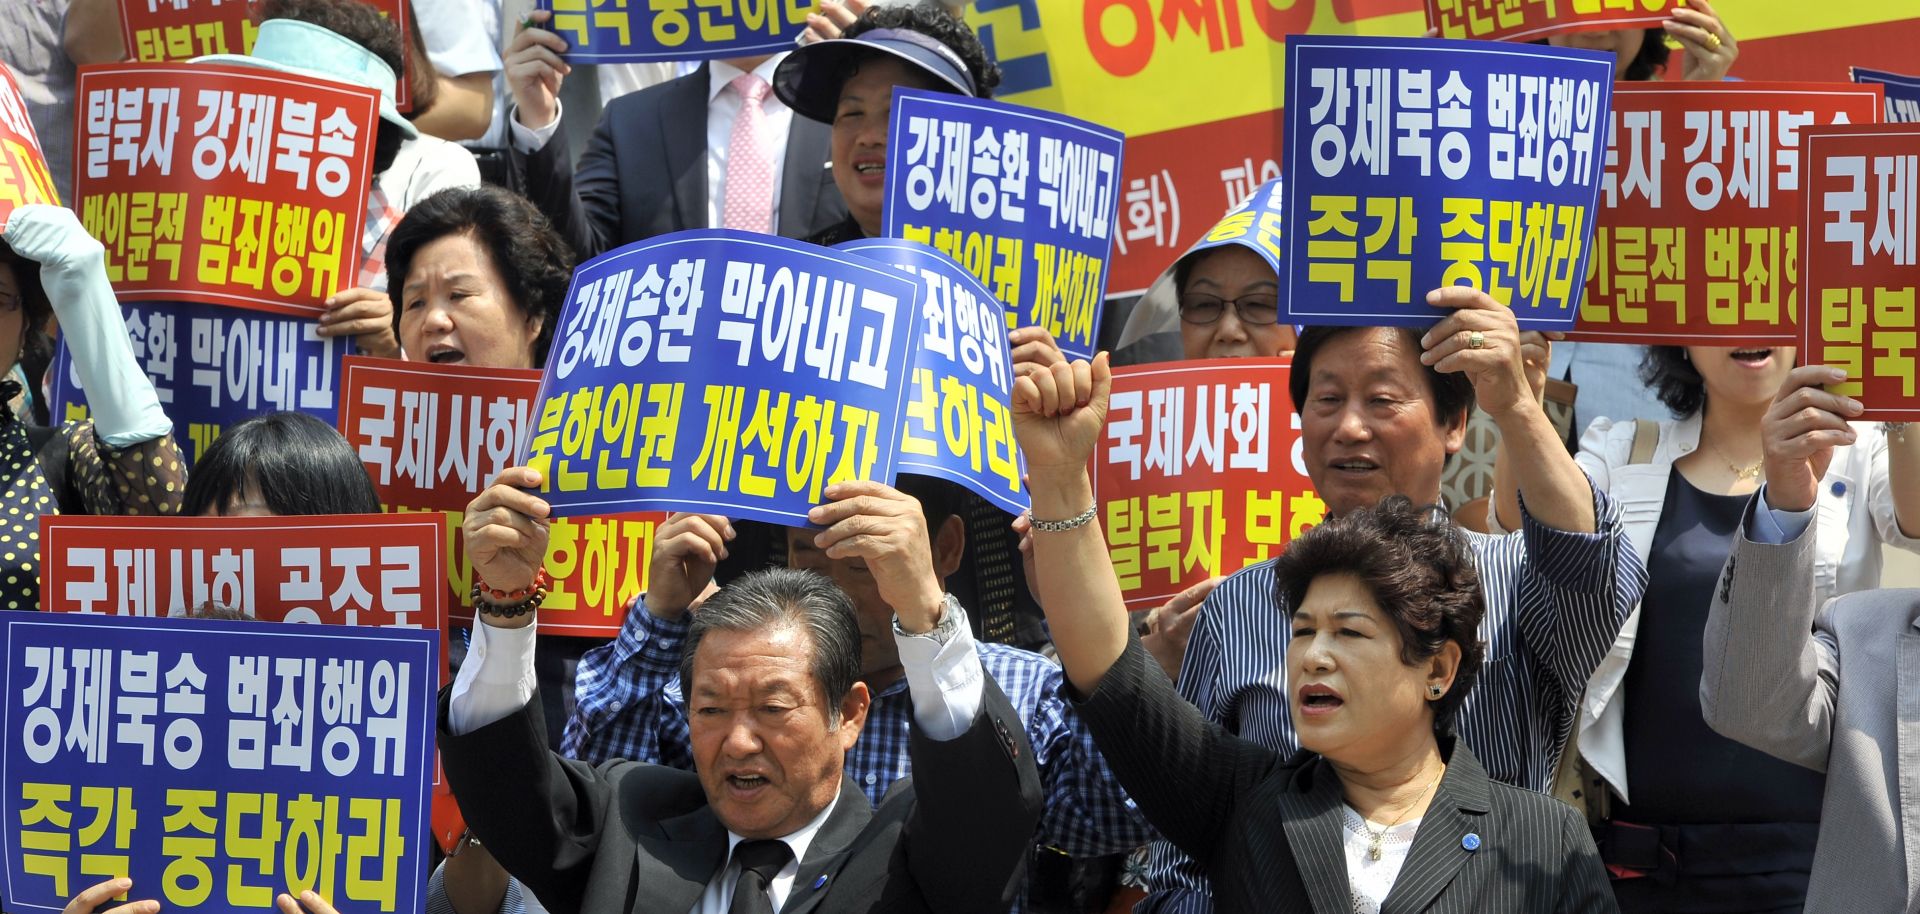 Some 200 South Korean conservative activists from the Korea Freedom Federation stage a protest.